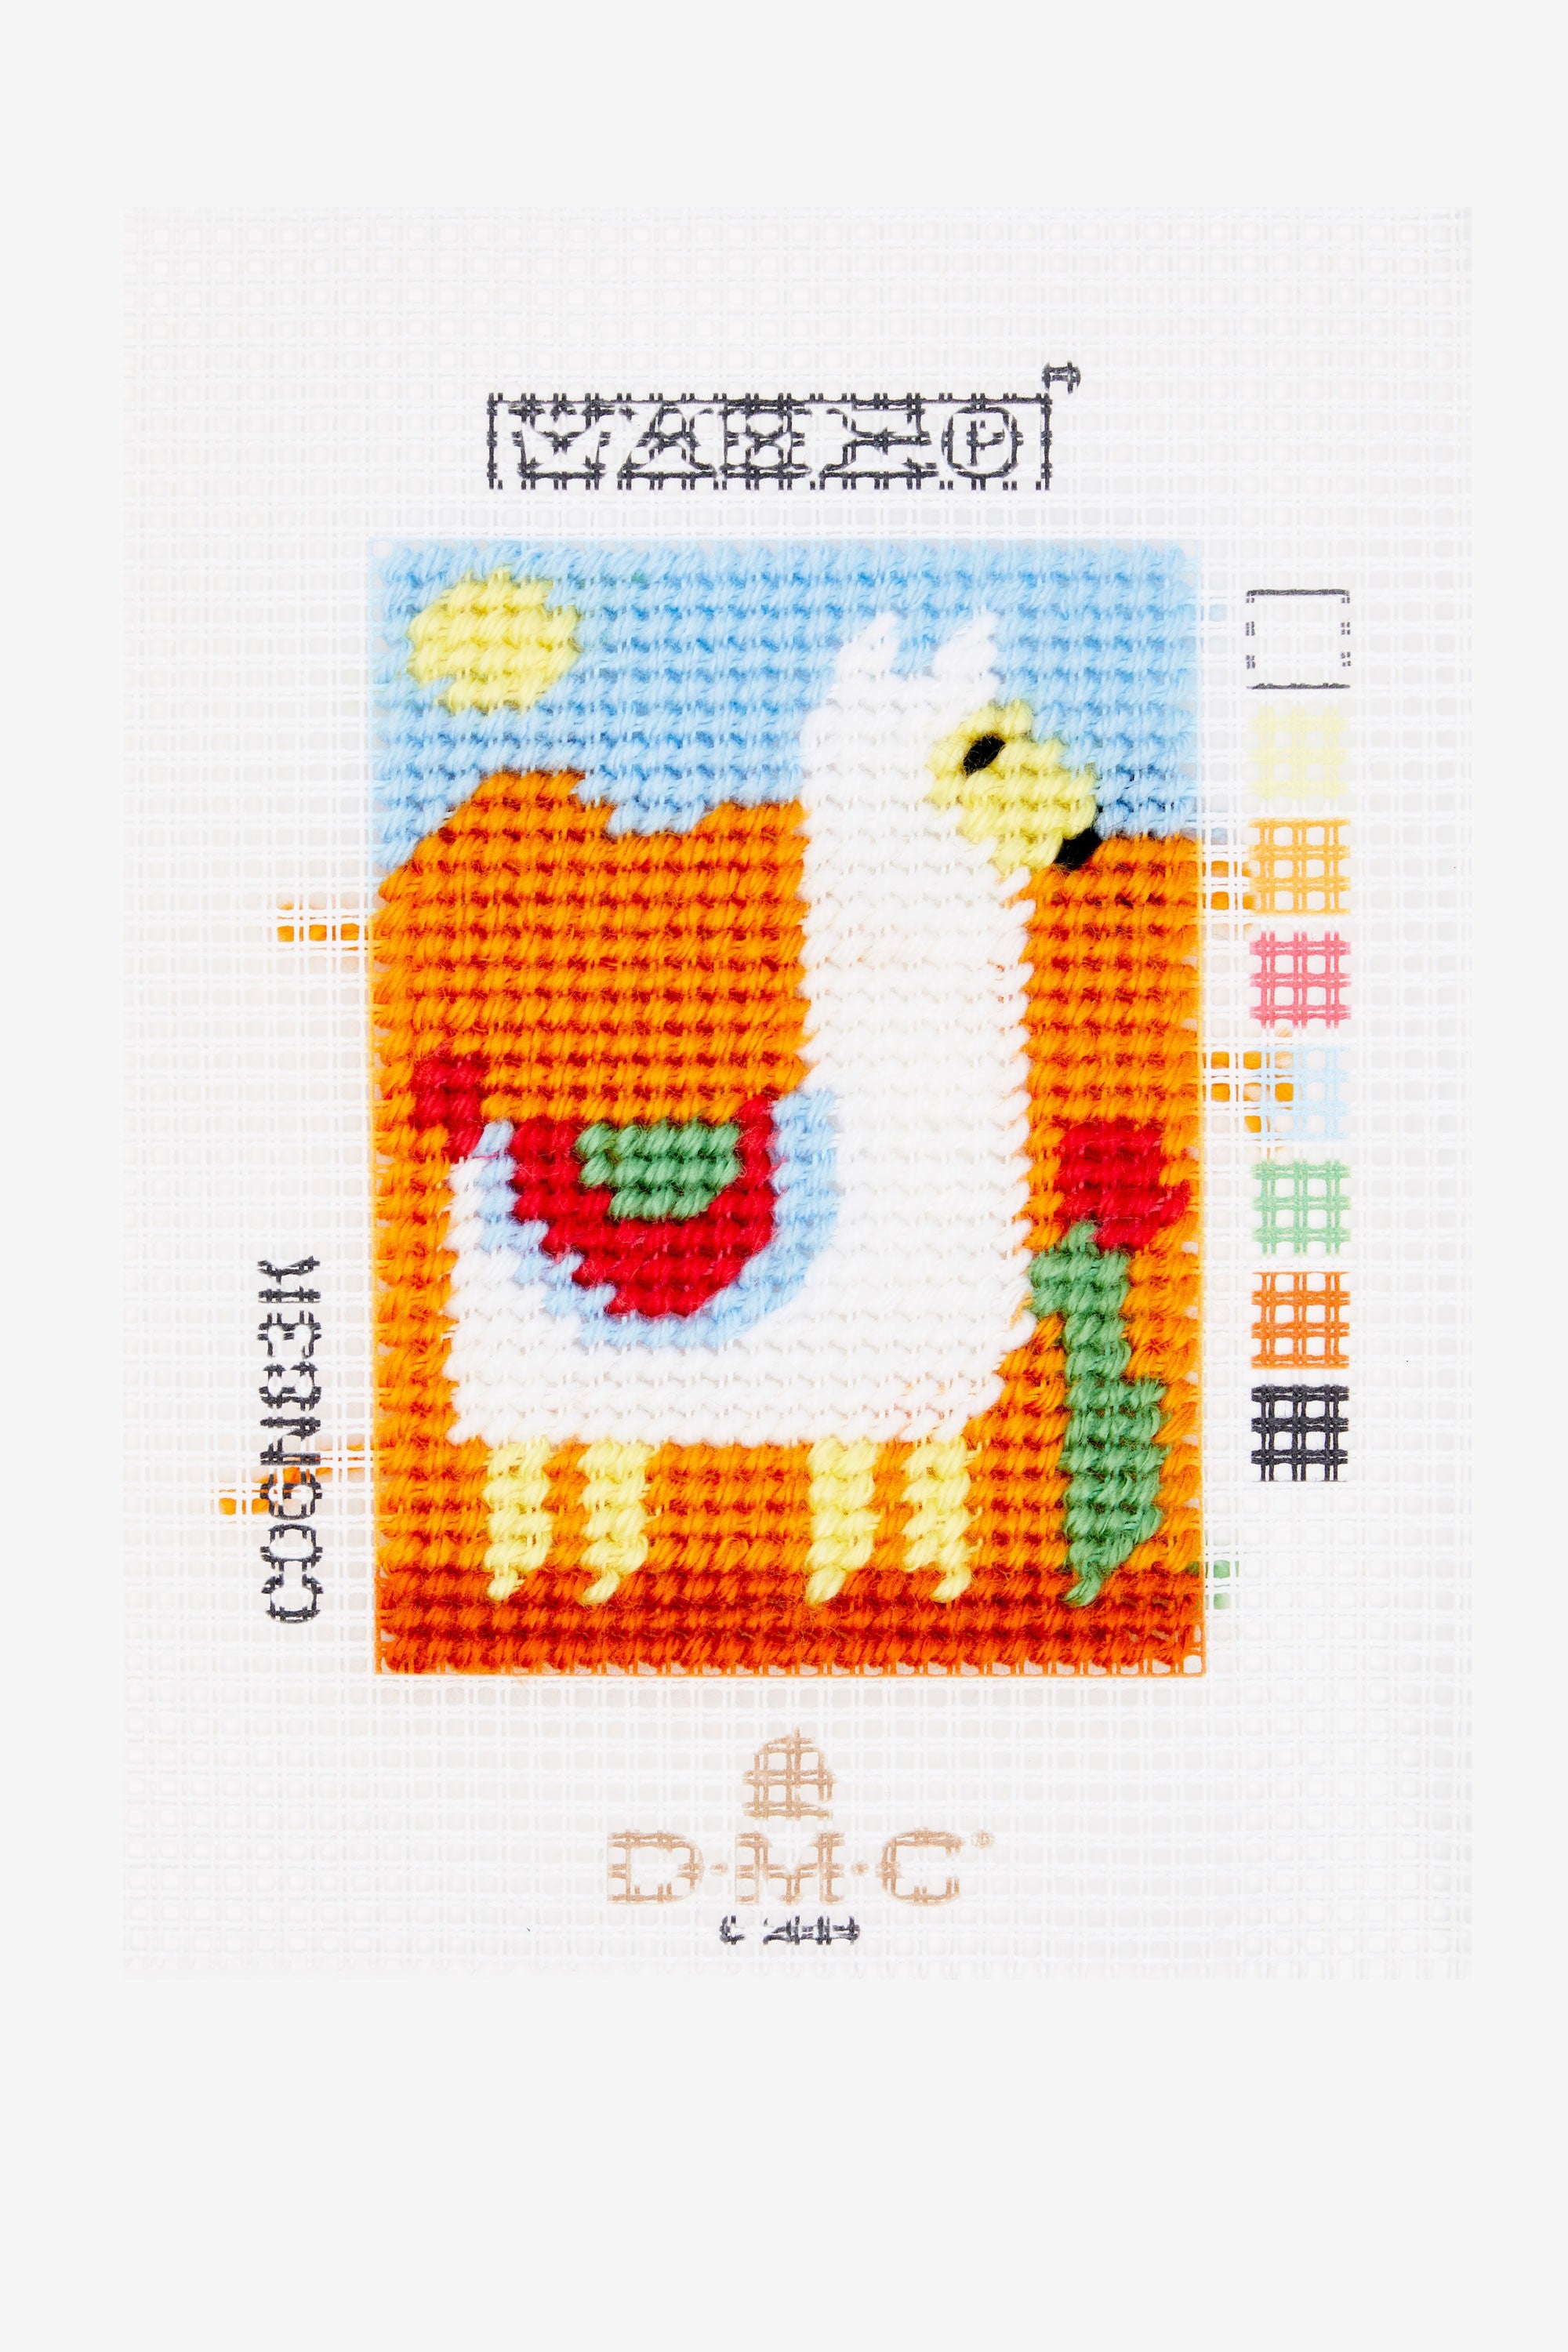 DMC - I Can Stitch! - Mike the Llama Children's Tapestry Kit